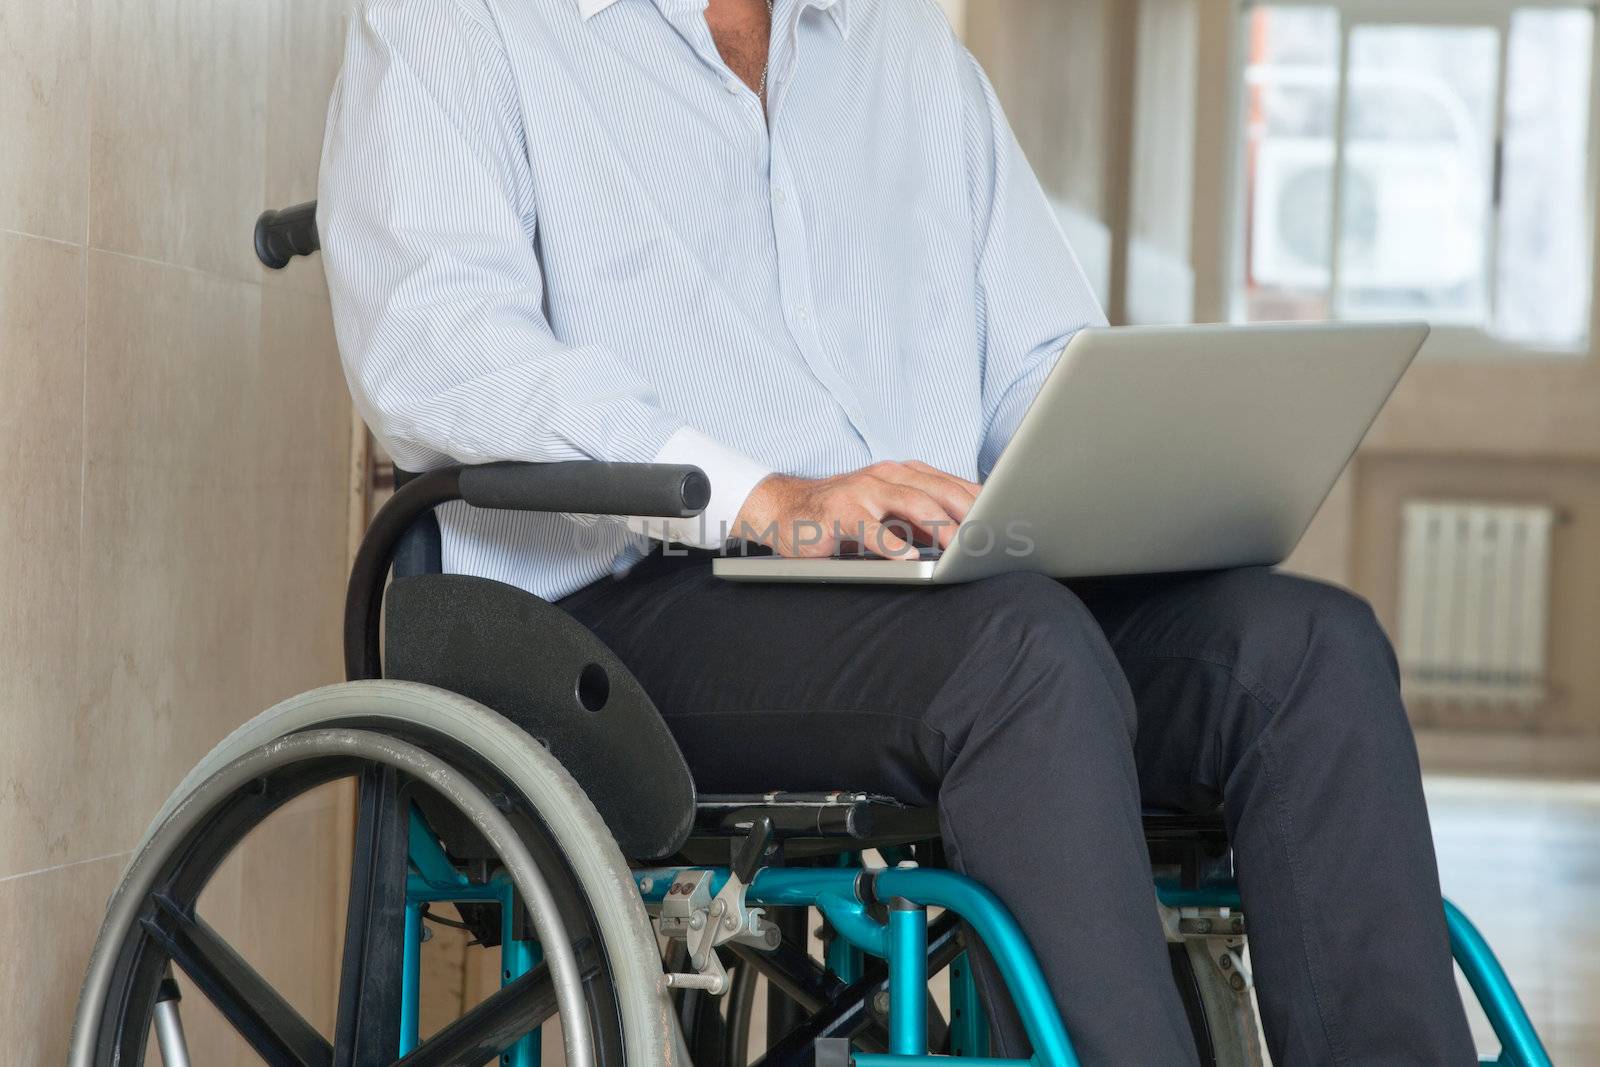 Mid section of a man sitting in wheel chair using laptop at hospital